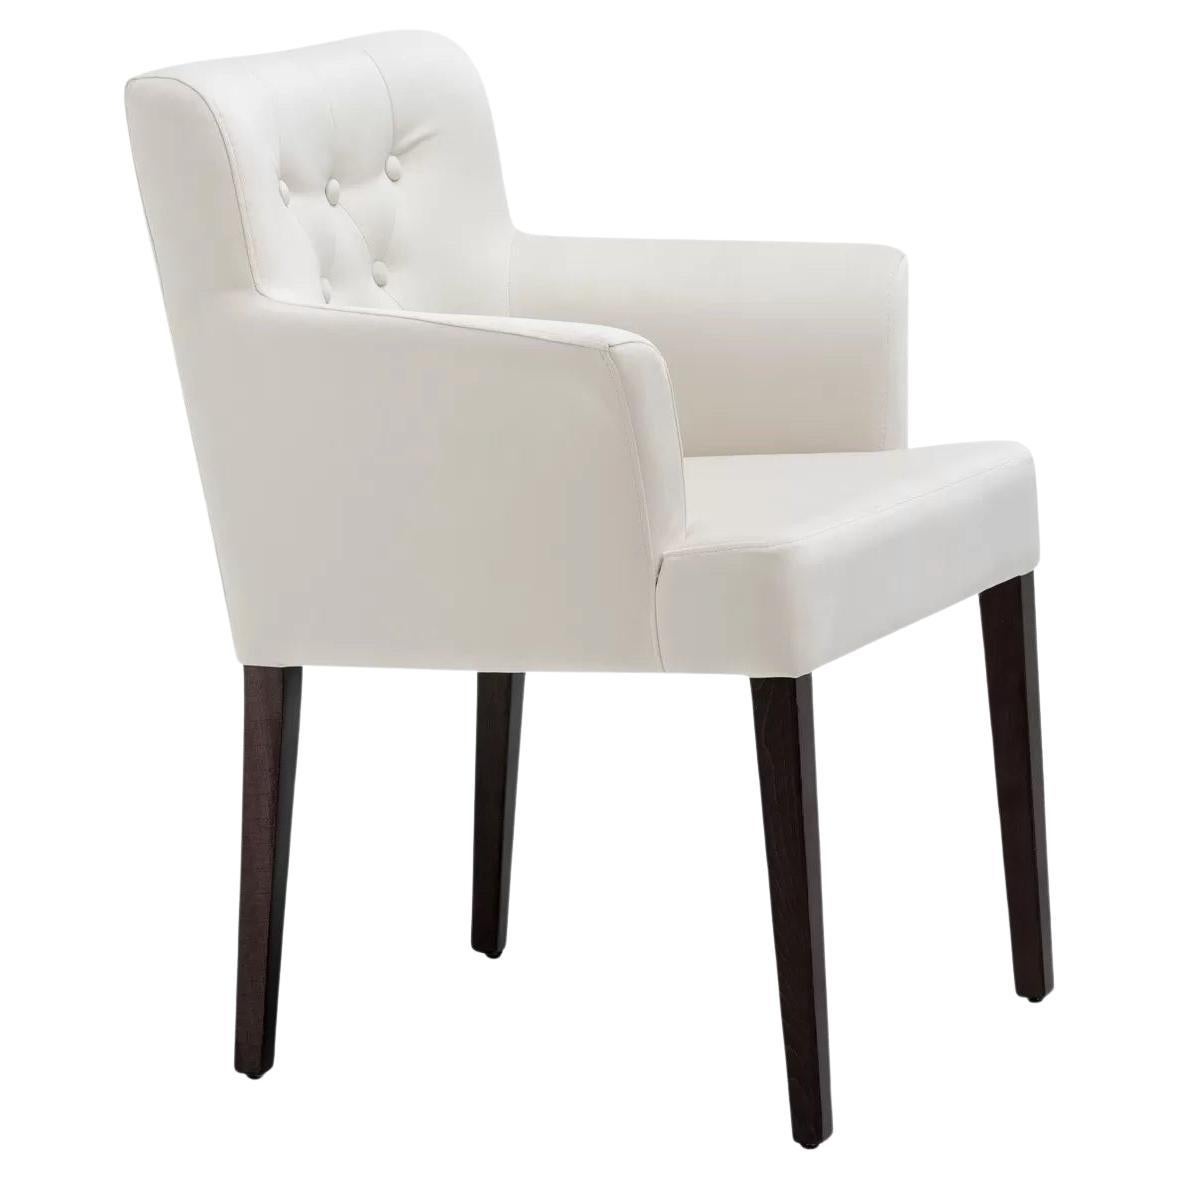 Upholstered armchair of classic style. Body of contained dimensions, and straight lines that seek to contrast with the curves of the interior of the arm and back, which provide a touch of warmth and comfortable interior. The classic appearance is